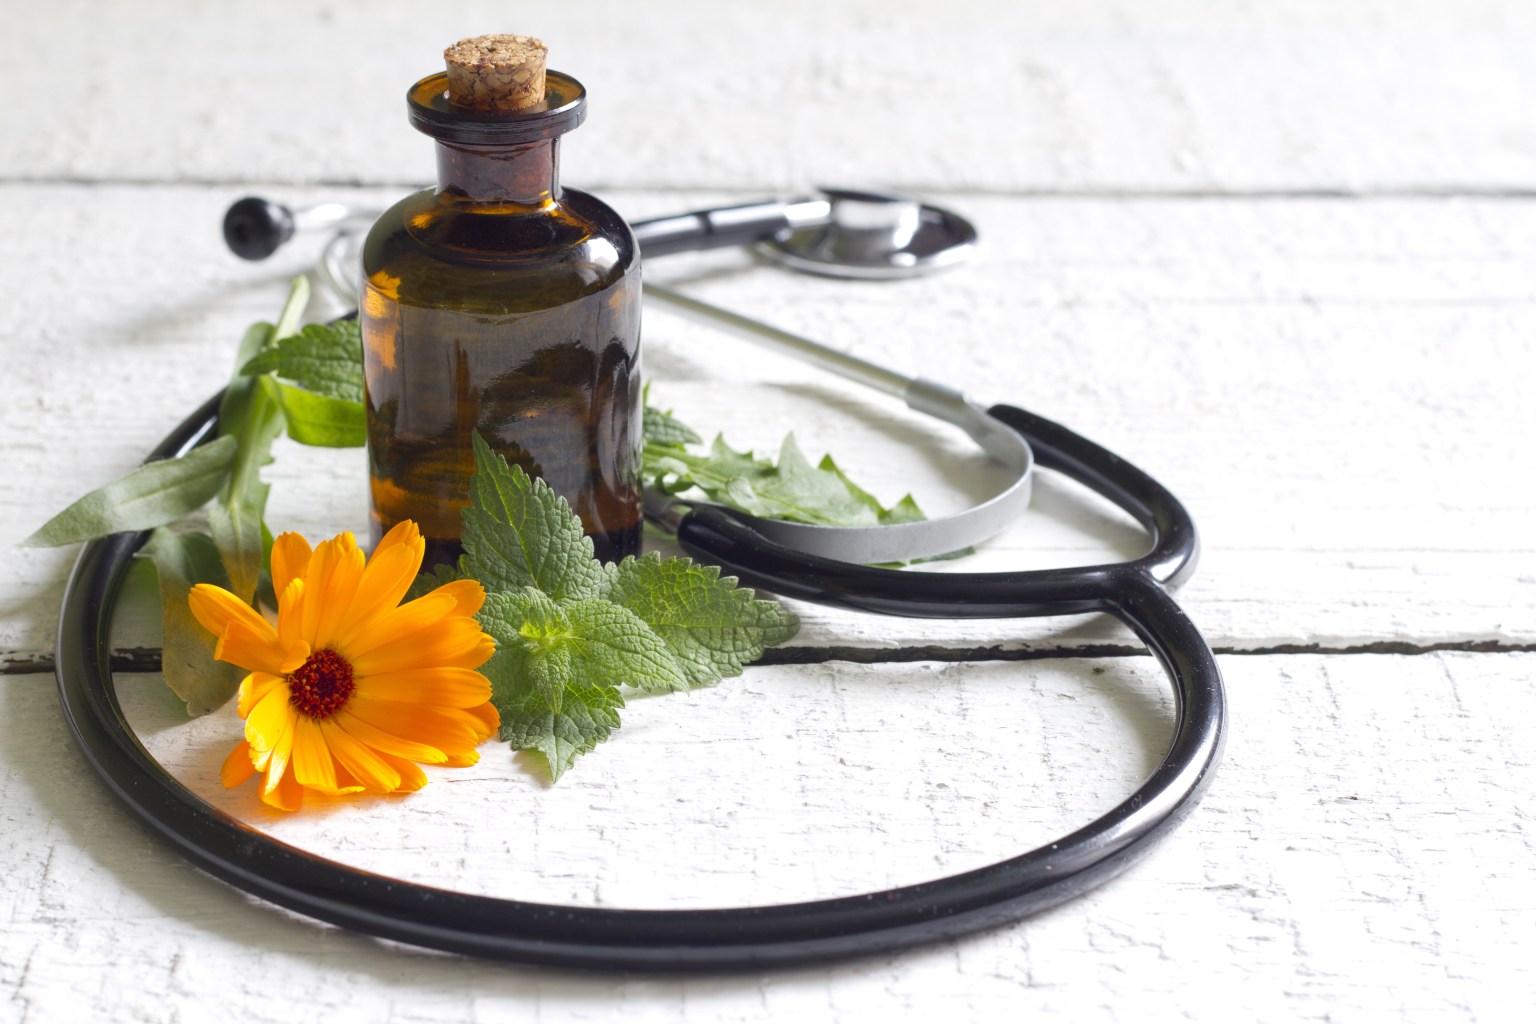 A stethoscope laying on a wooden table with a flower and brown glass jar. 